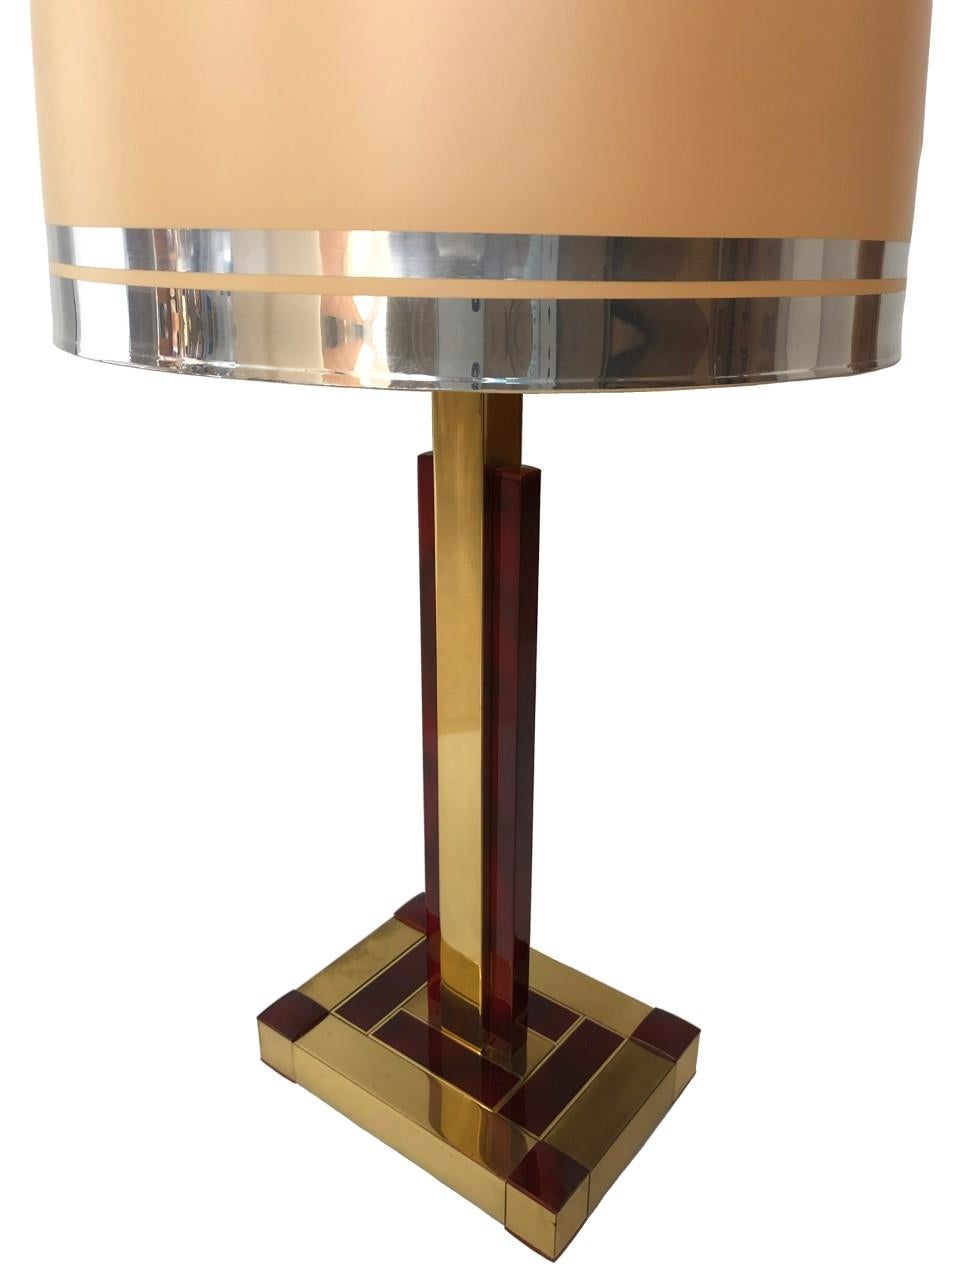 Charming and unique midcentury individual table lamp from 1970s. This table lamp is Willy Rizzo designed and crafted during the 1970s in Barcelona by “BD Lumica”.
This piece is composed by gold brass and tortoiseshell resin.
This table lamp is